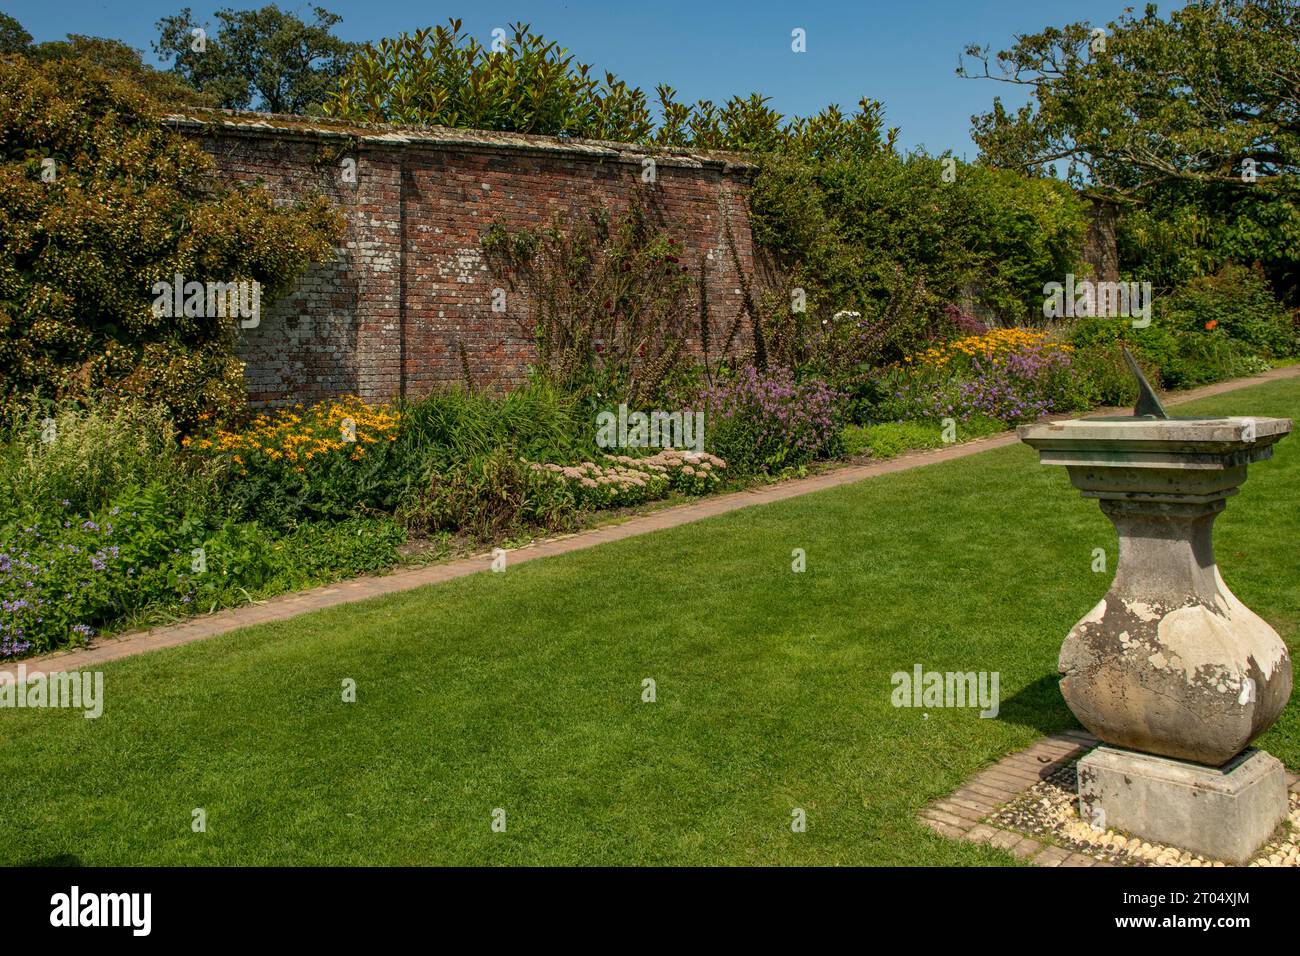 Walled Garden at Lost Gardens of Heligan, St Austell, Cornwall, England Stockfoto